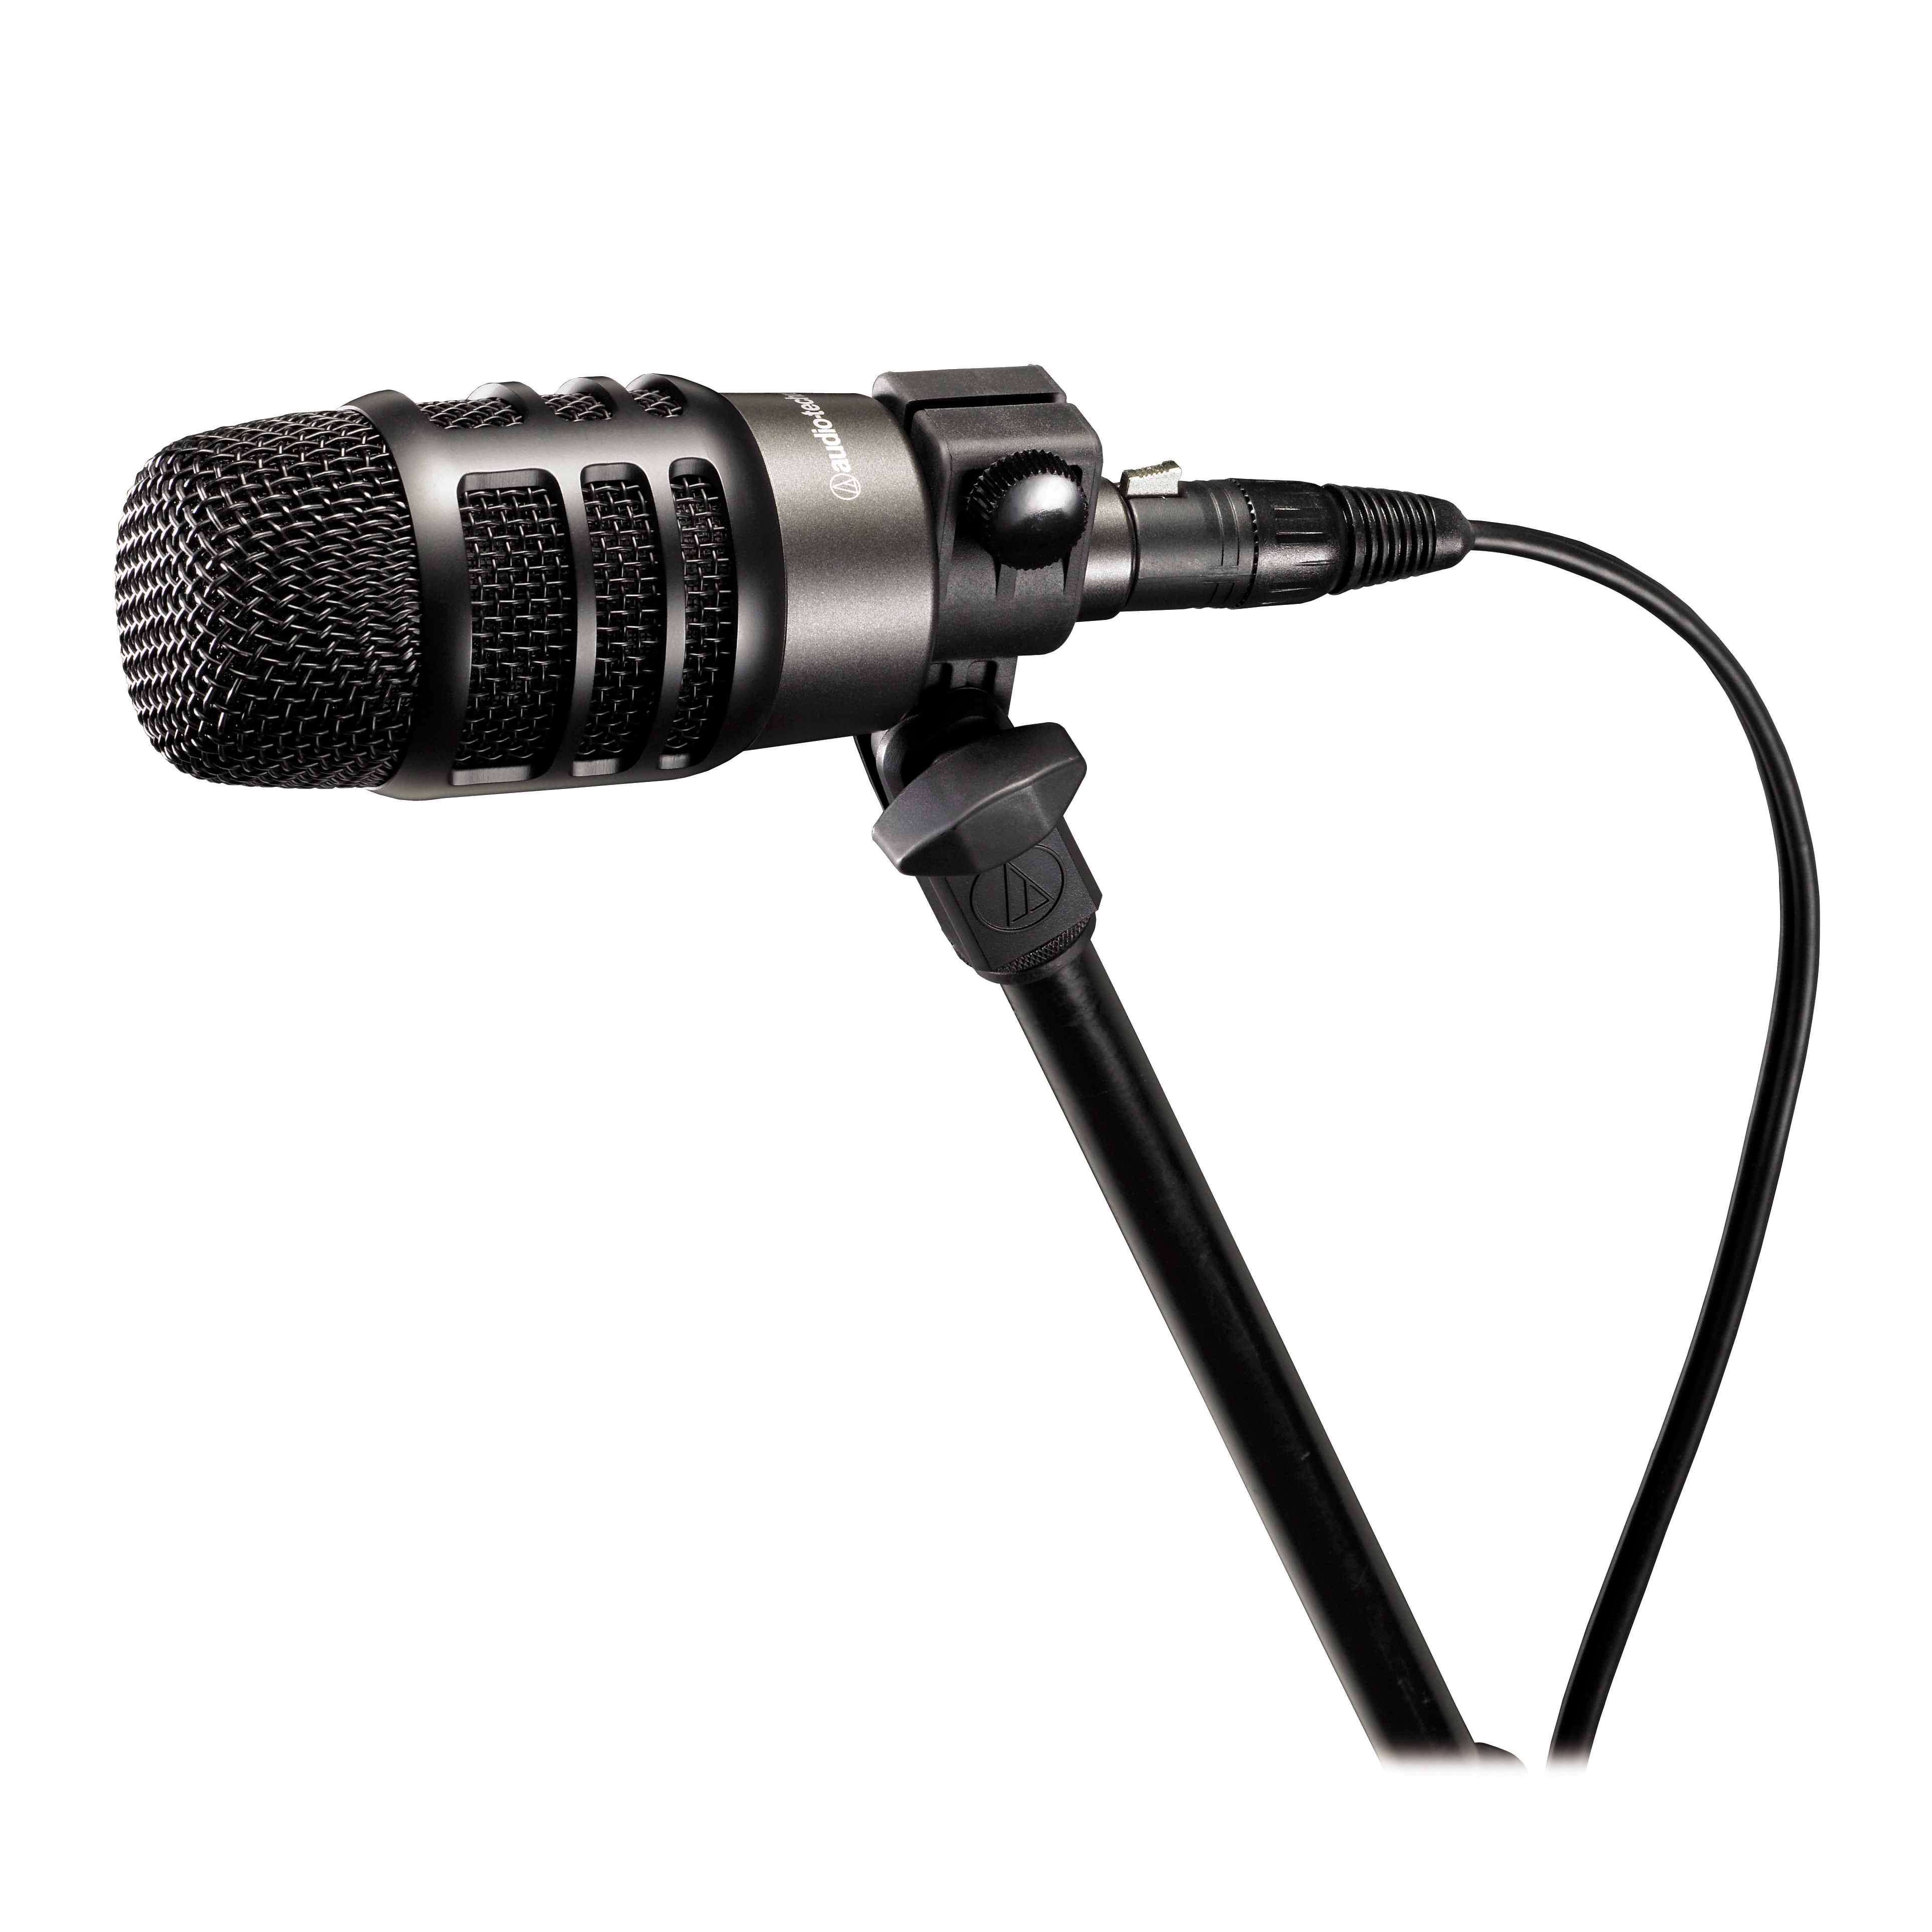 Win Audio-Technica Artist Series Mics For Your Band & Get Featured in Print!